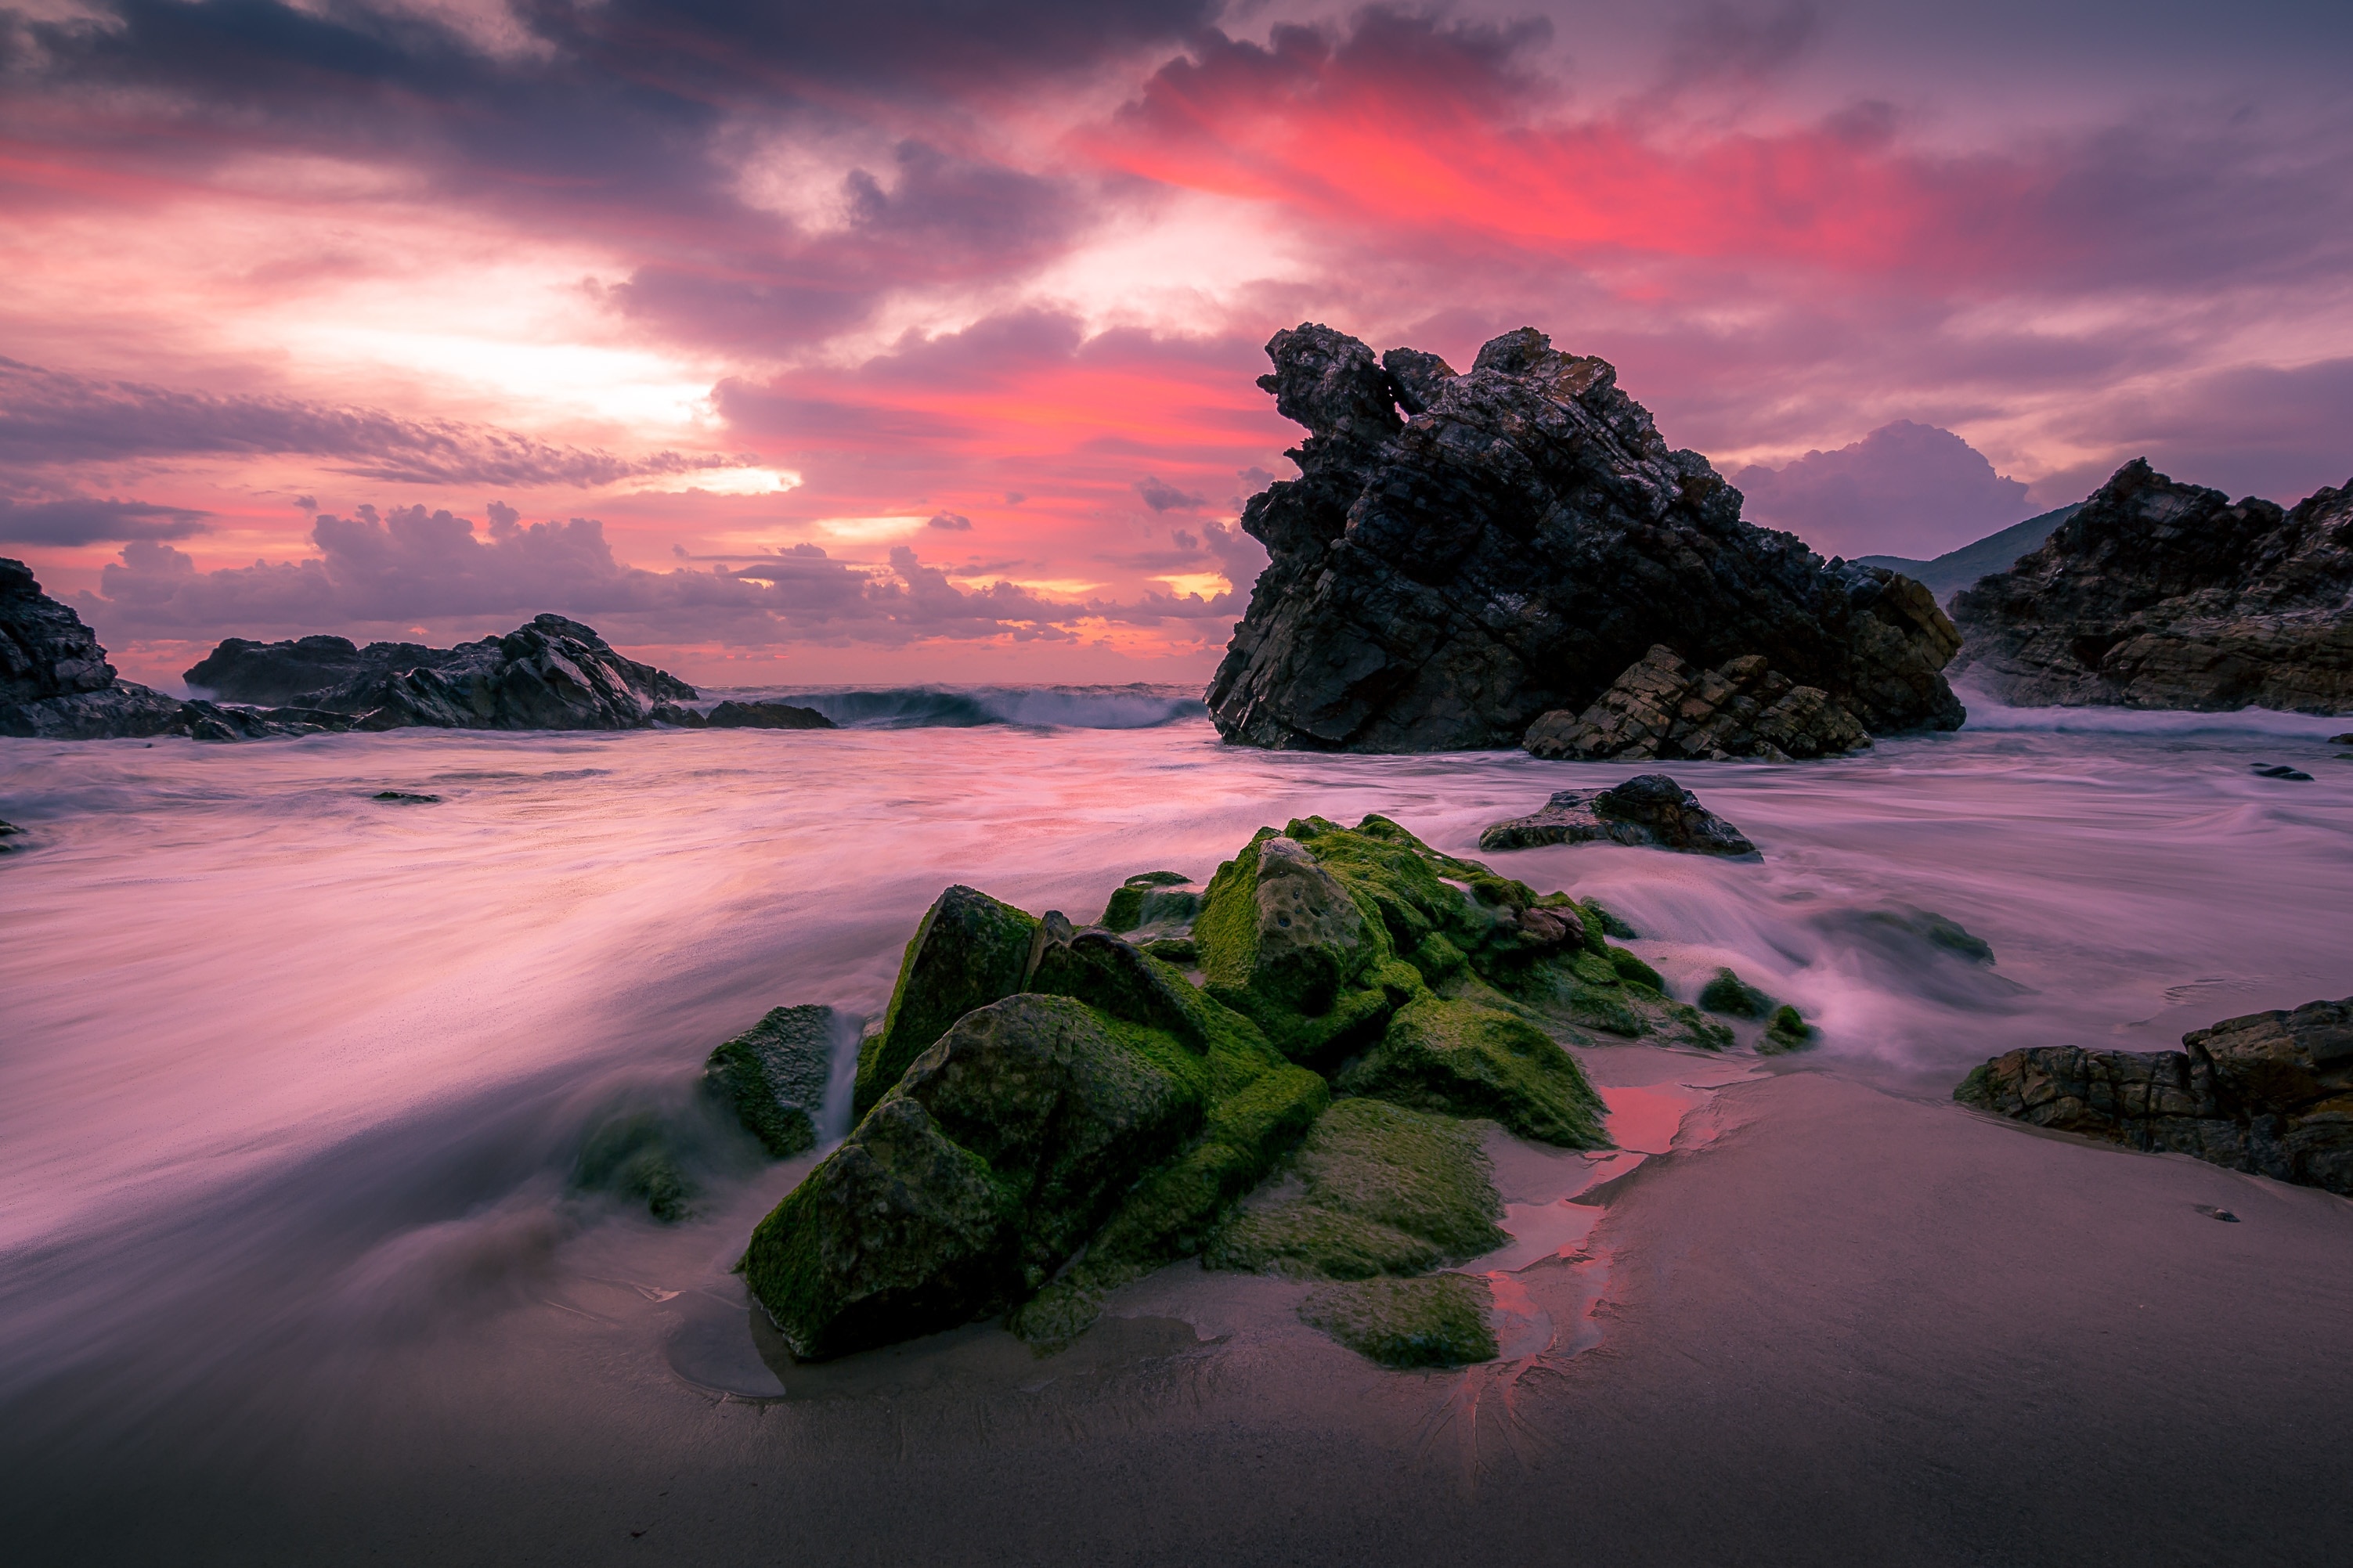 A very quiet beach next to the more popular main beaches of Forster, Burgess beach has some amazing rock formations making it a great sunrise photography location. #nature #trovember